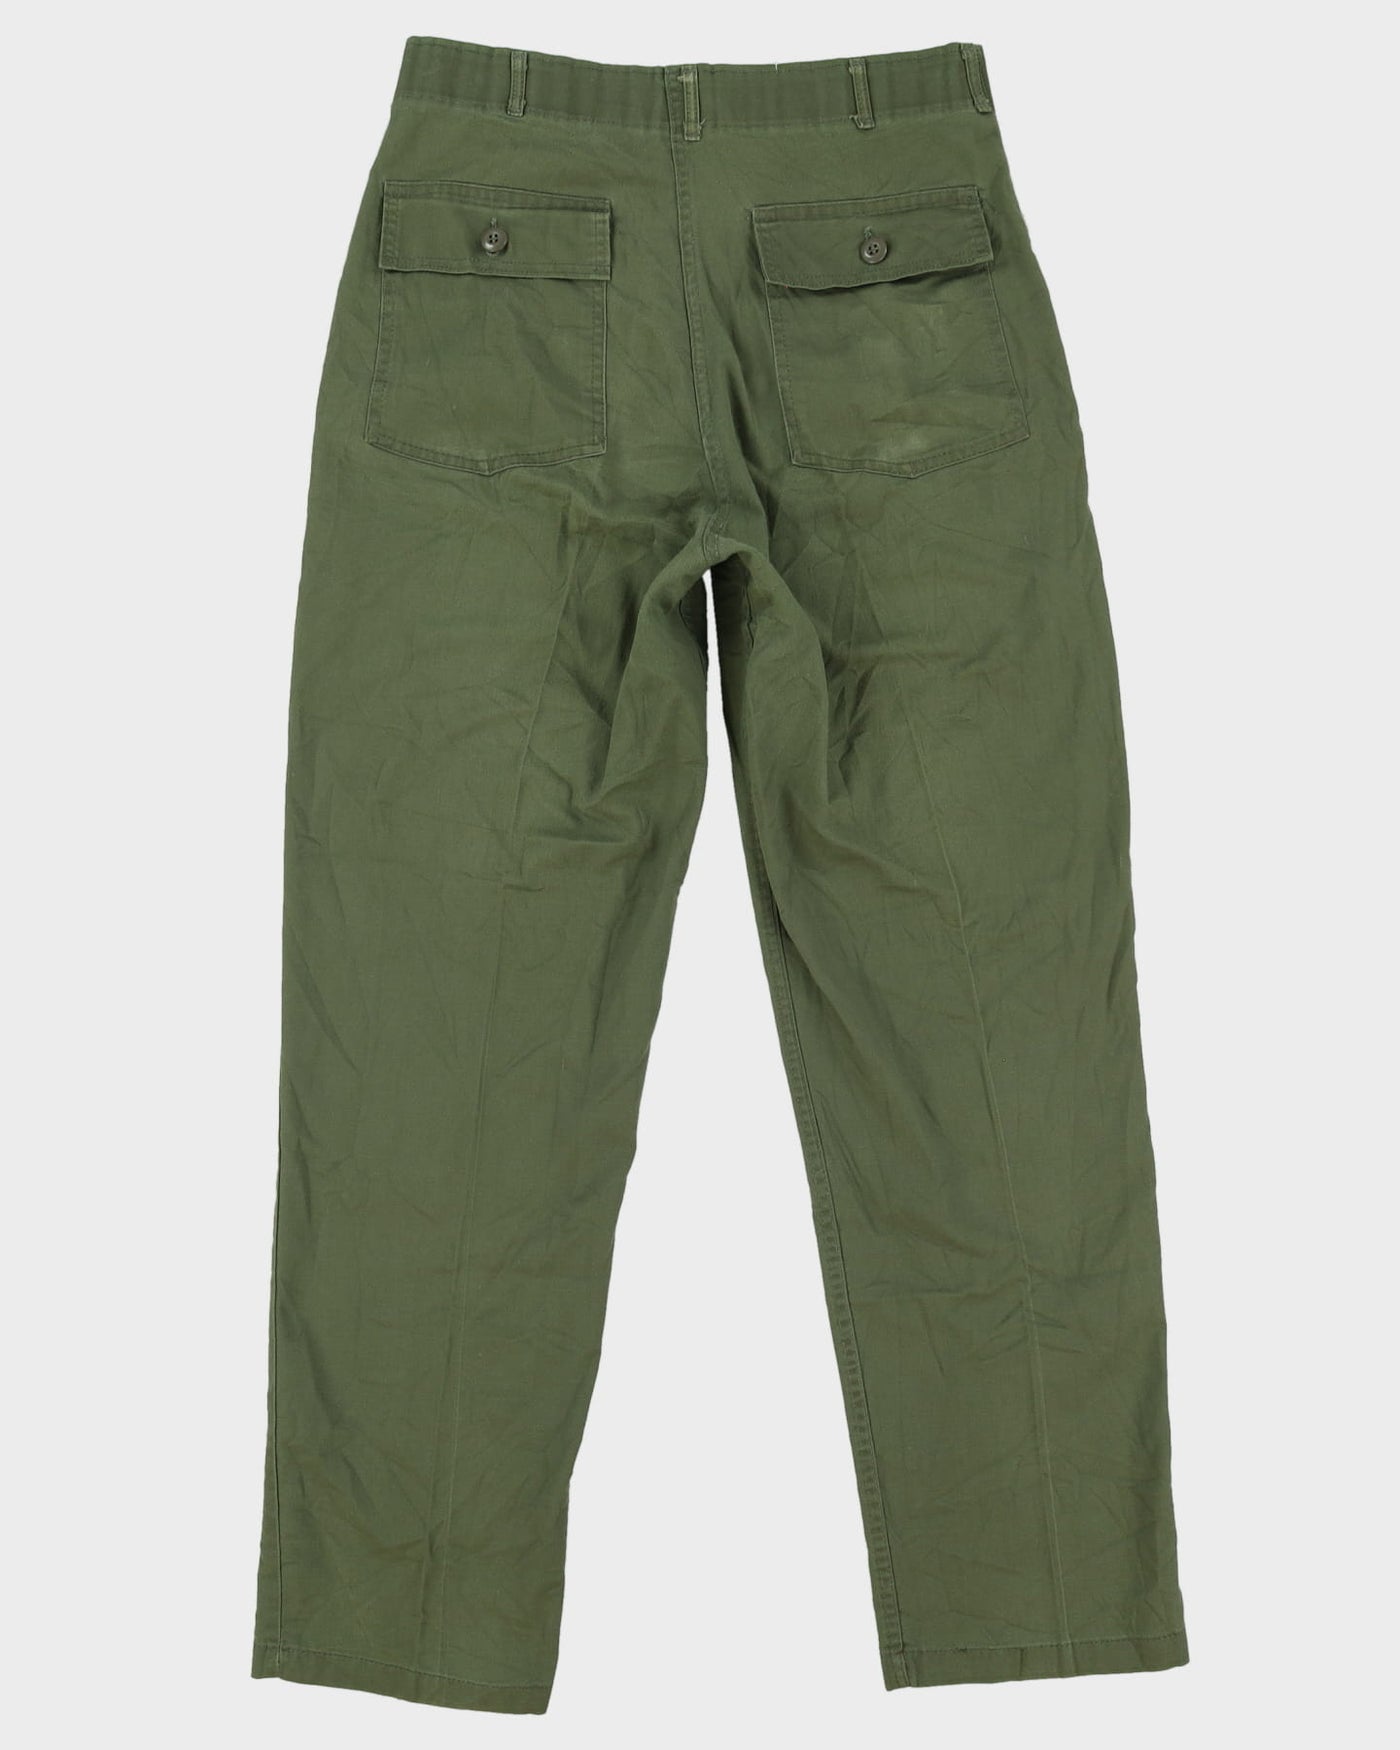 Vintage 1970s US Army Dura-Press OG-507 Utility Trousers - 32x32